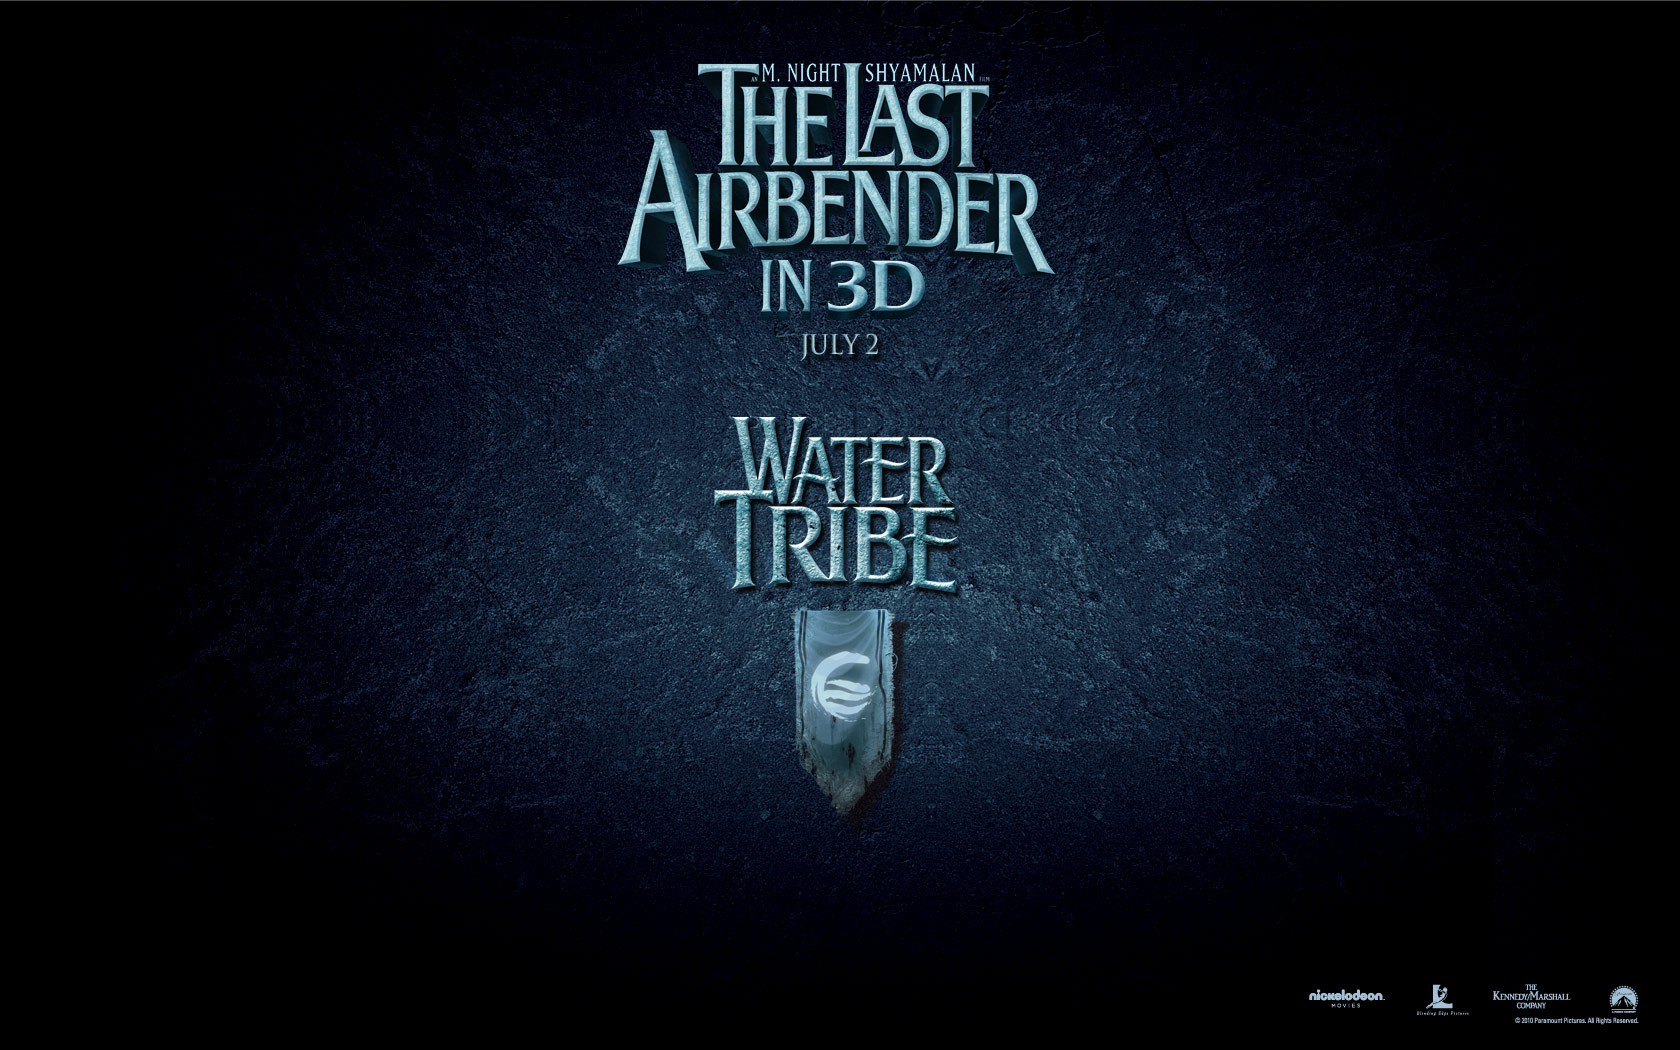  The Last Airbender(ֽ4)